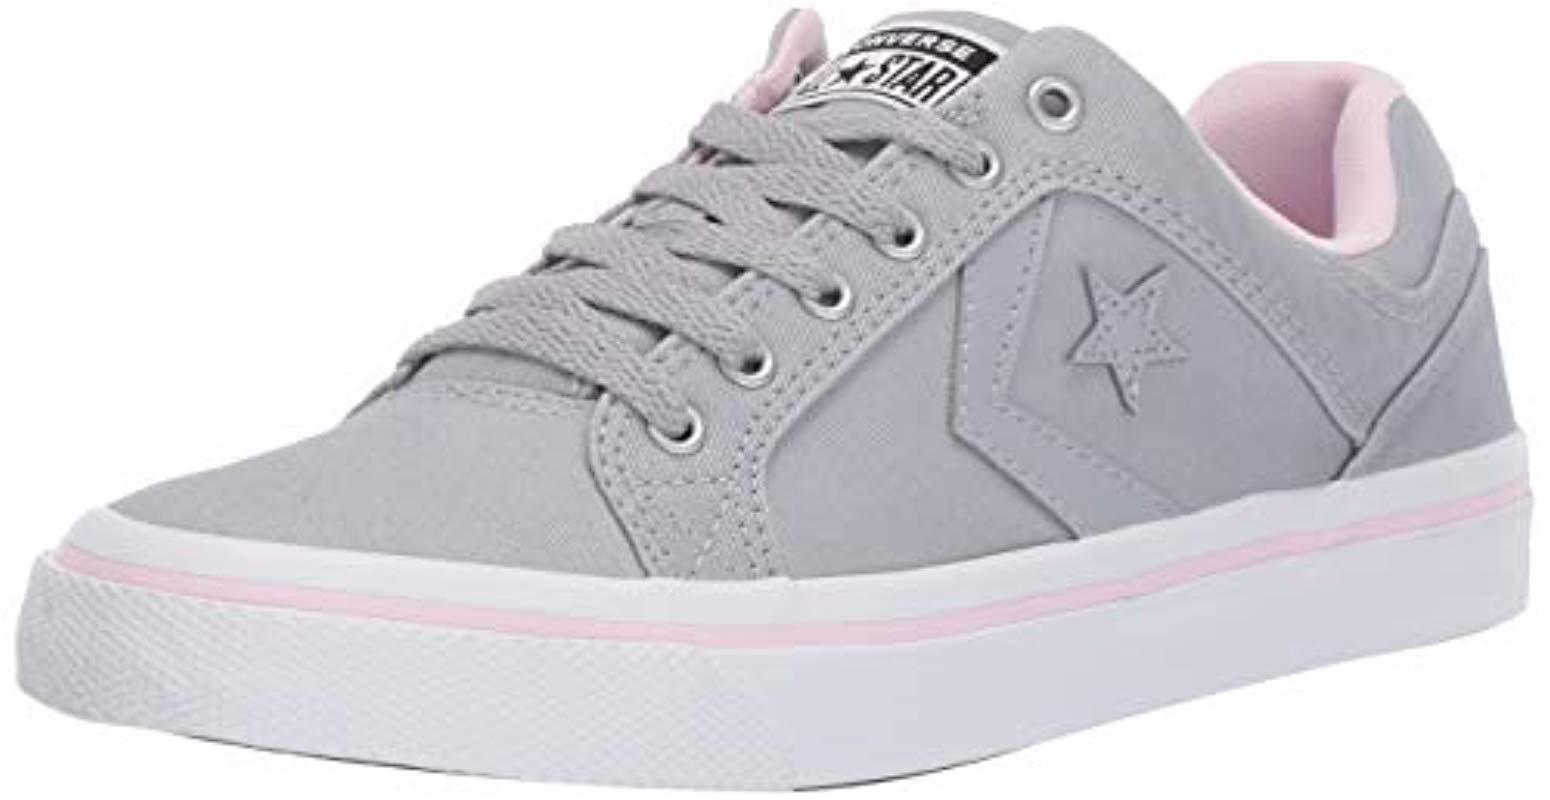 gray and pink converse